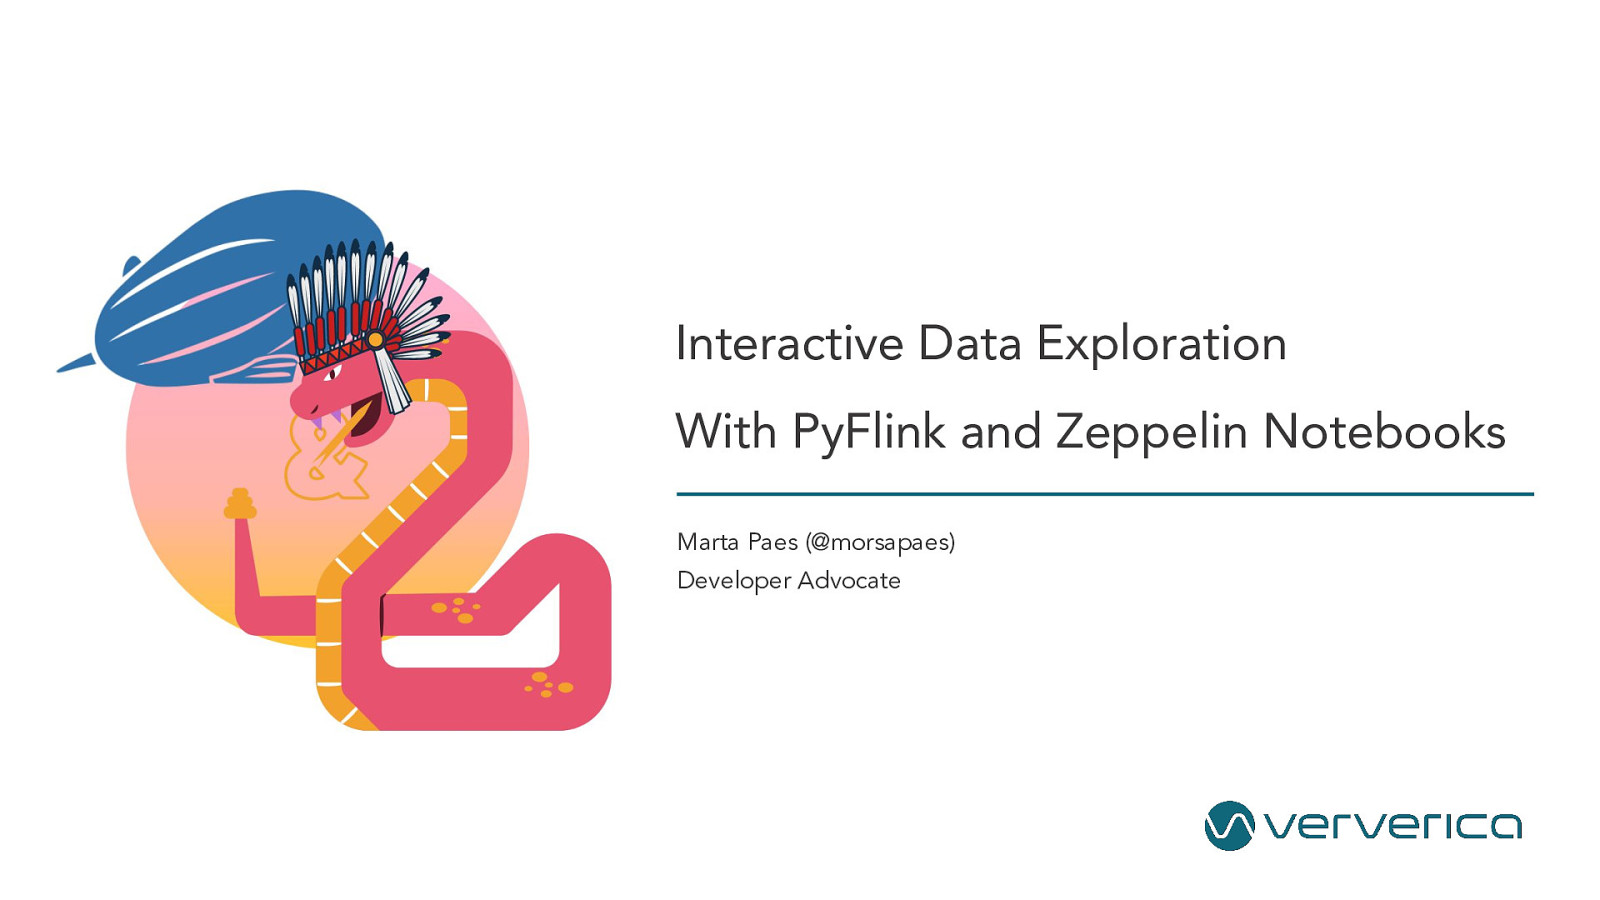 Snakes on a Plane: Interactive Data Exploration with PyFlink and Zeppelin Notebooks